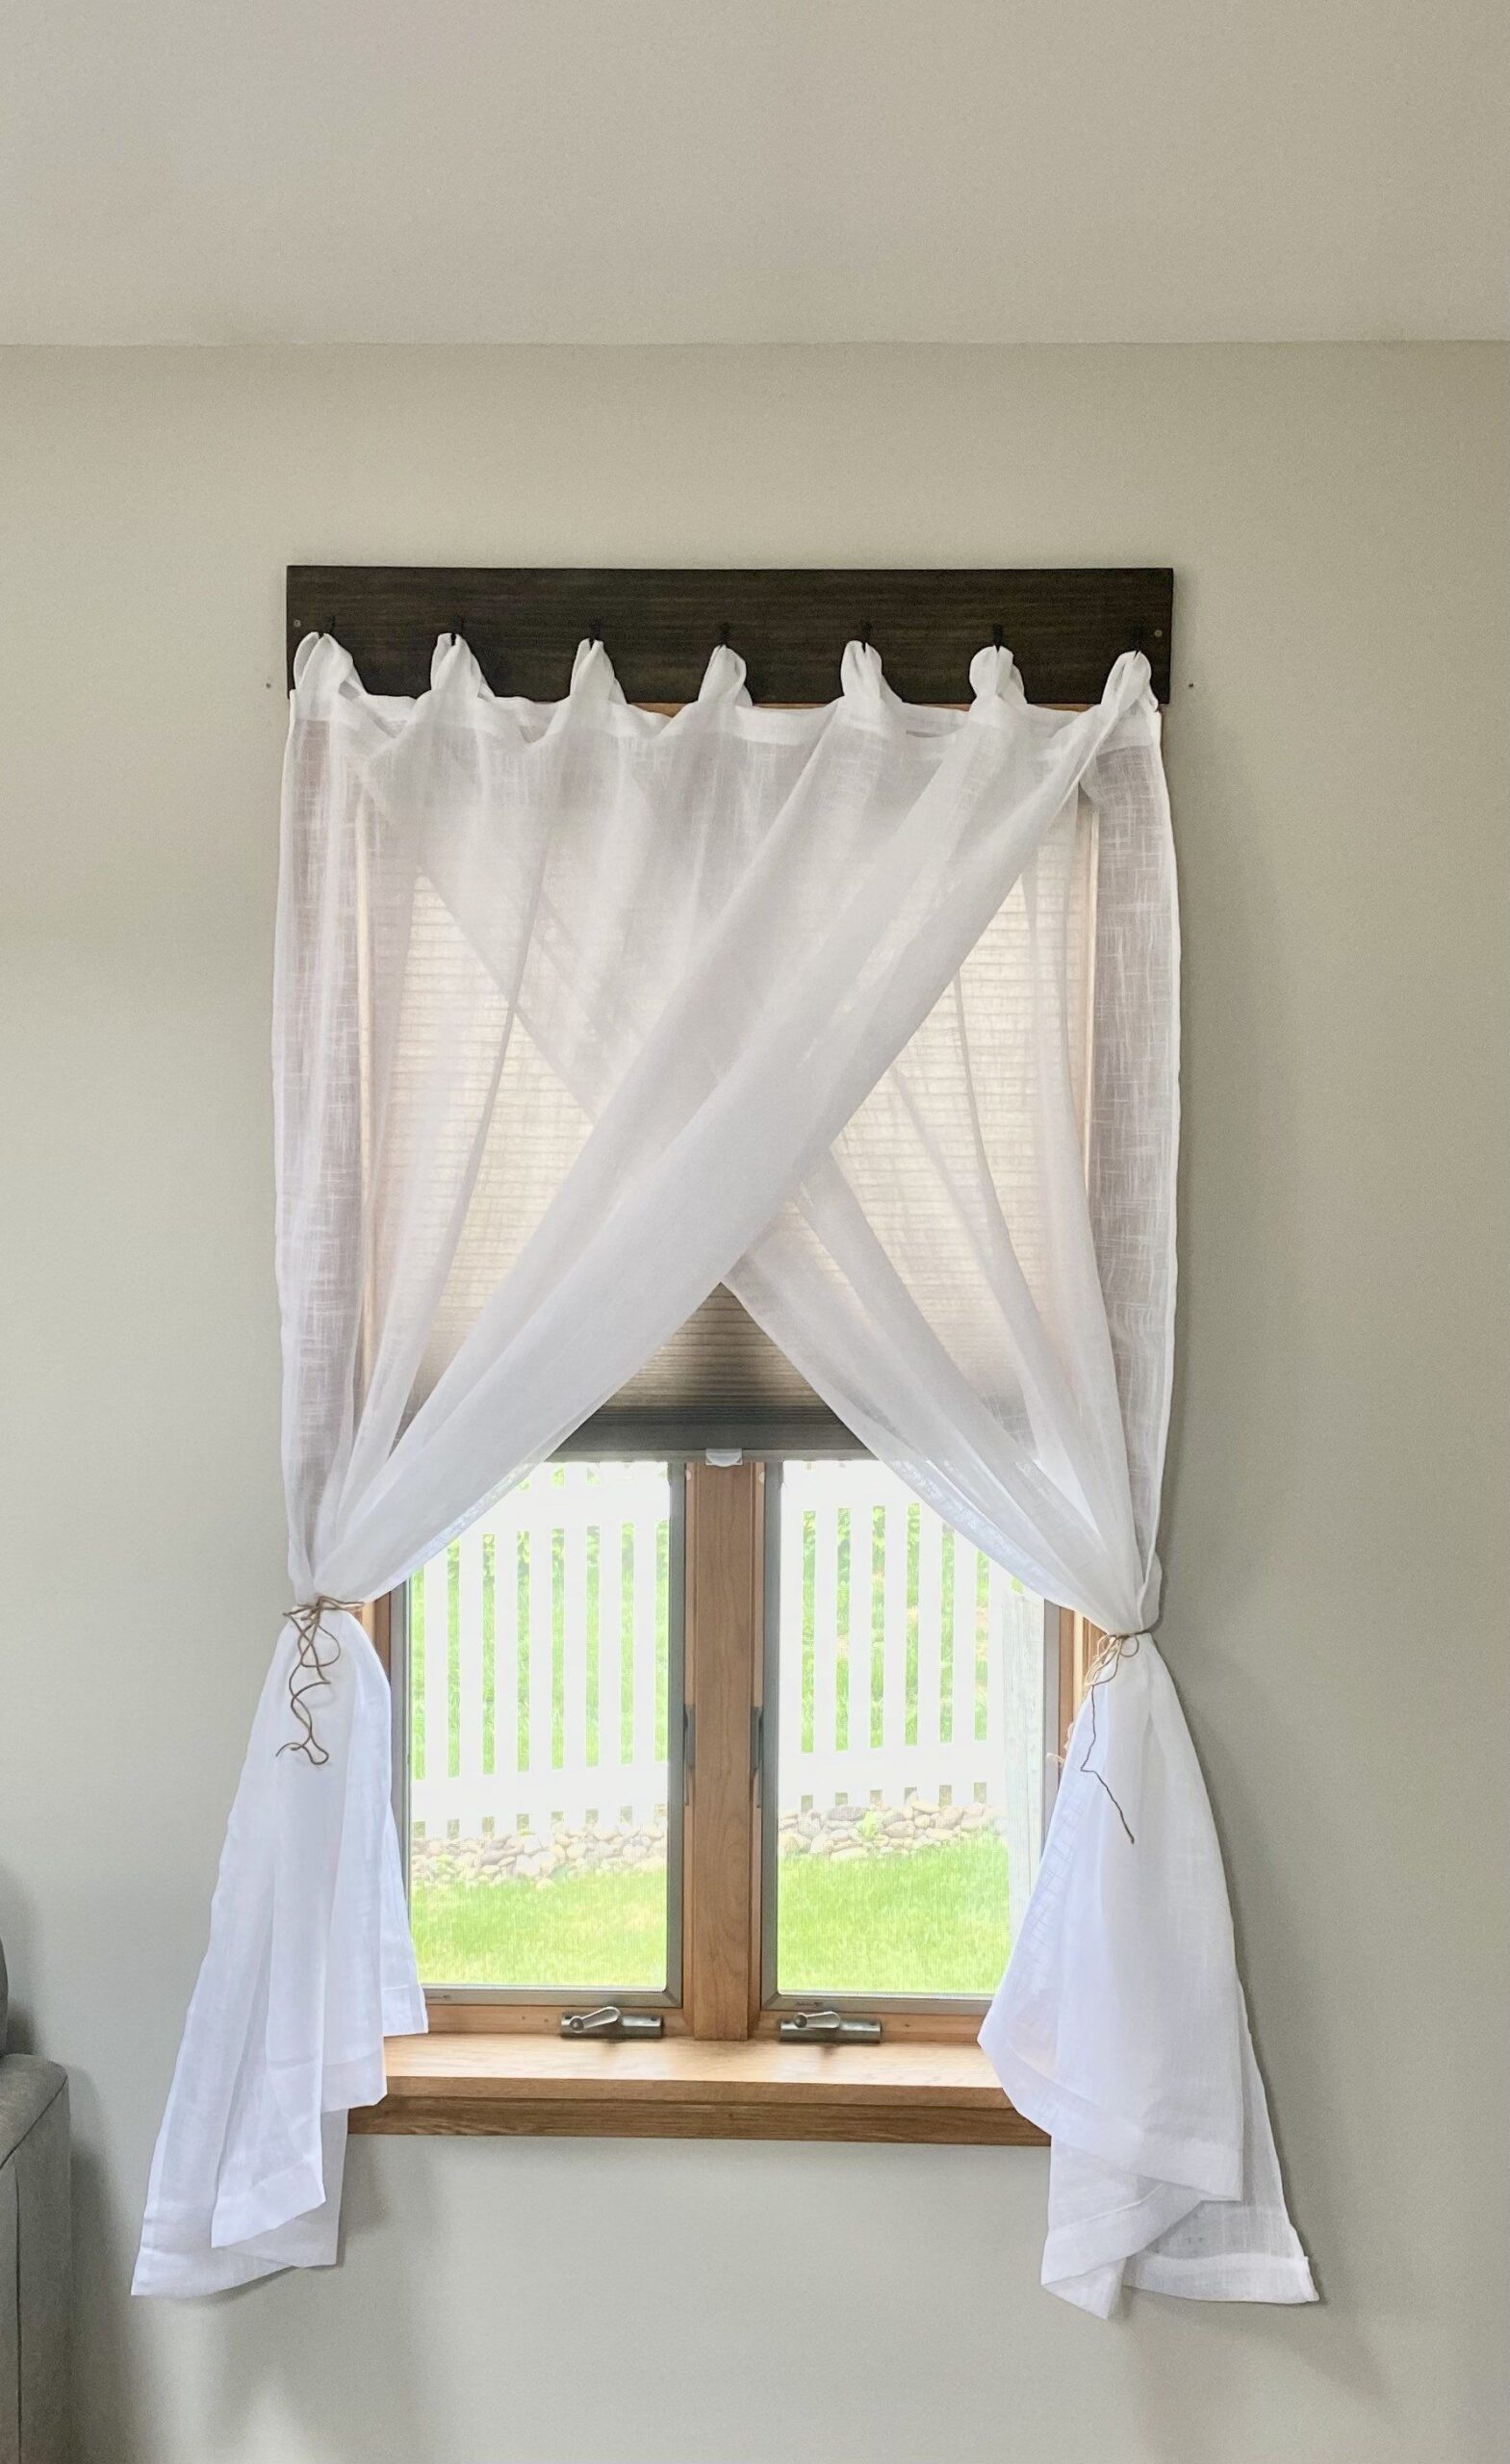 Tab Top Curtains: Stylish and Functional Window Treatments